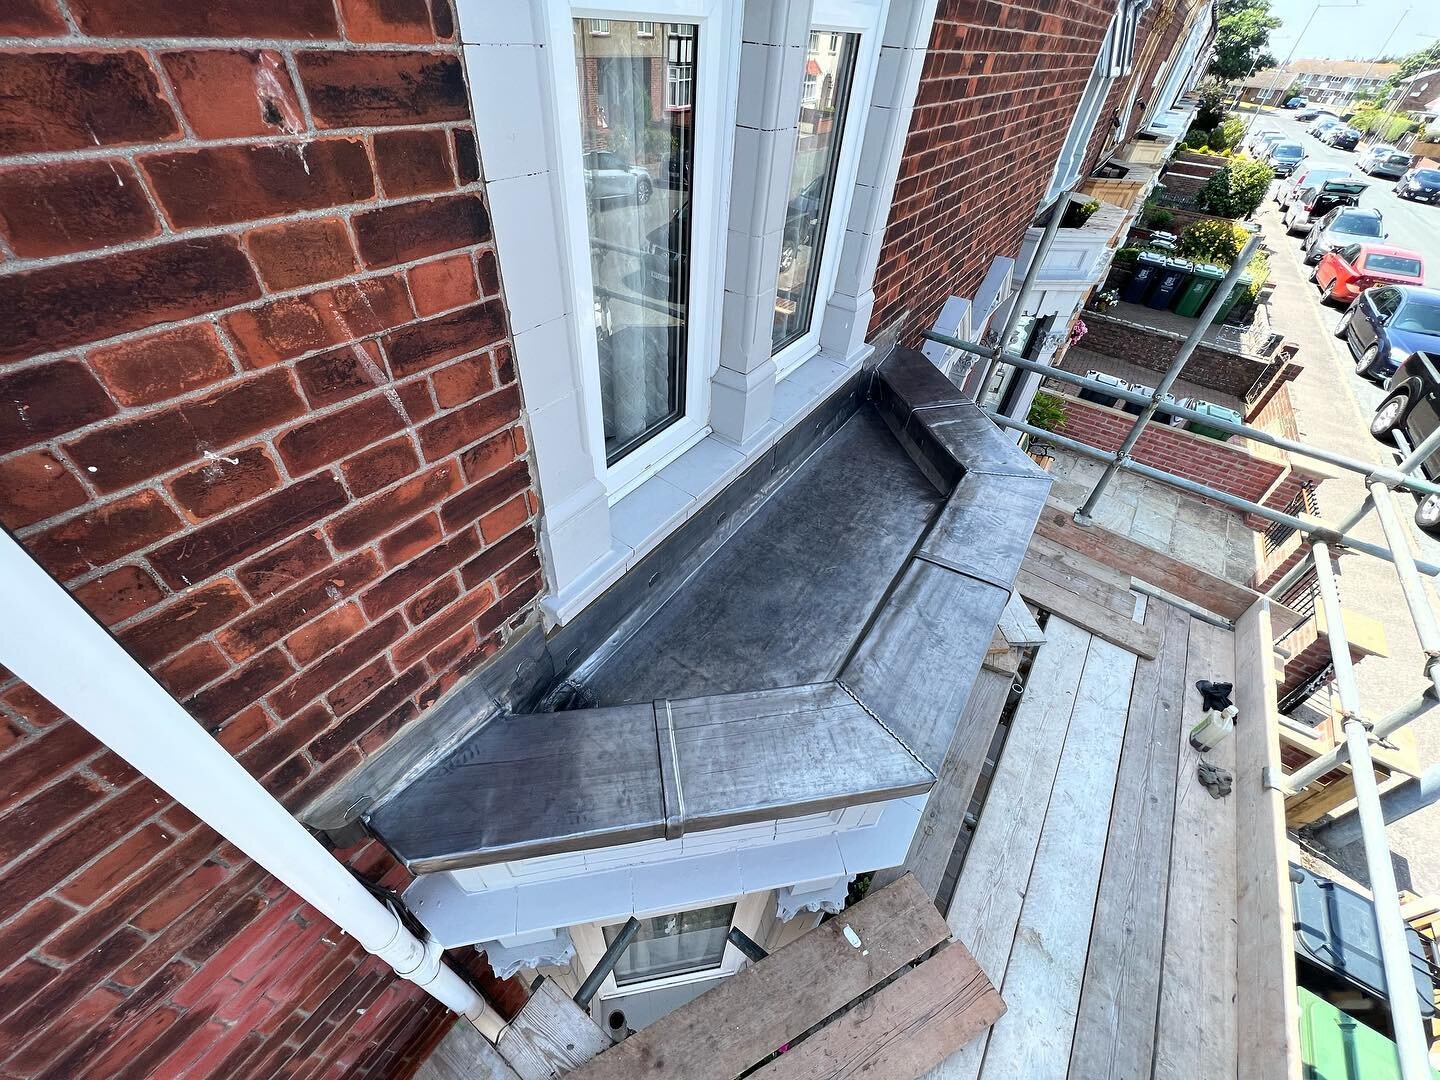 Nice little inverted bay window we re done last week, unfortunately it wasn&rsquo;t up to scratch and the water wouldn&rsquo;t stop coming in. The client definitely won&rsquo;t have anymore problems now. 📞07983131947 #leadwork #leadworker #leadworke